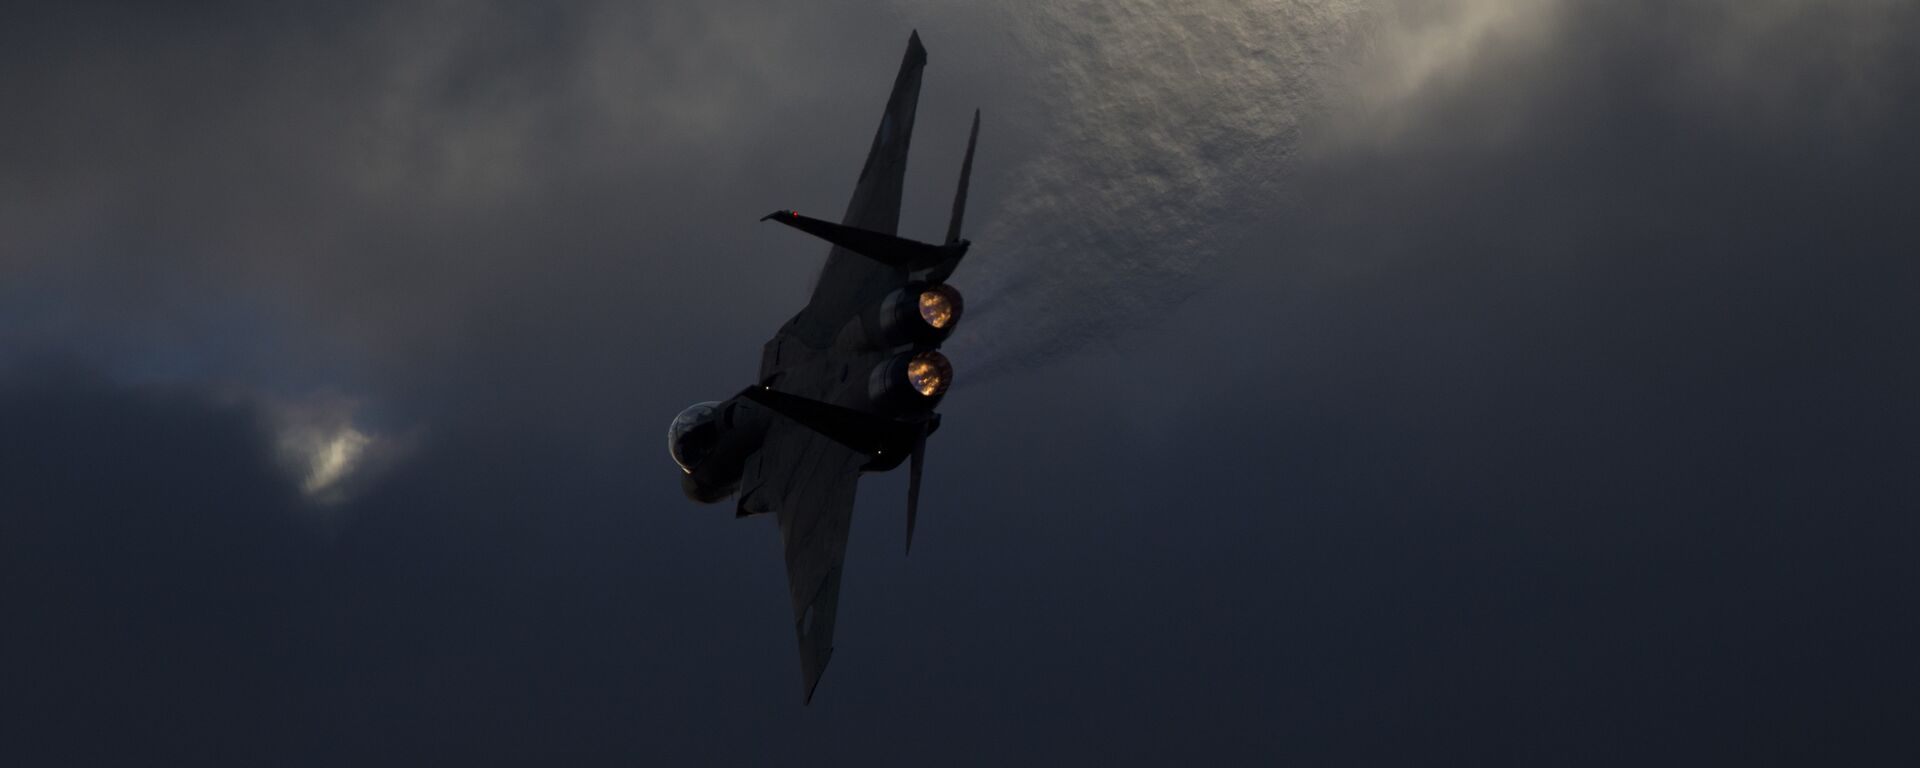 Israeli Air Force F-15 plane performs during a graduation ceremony for new pilots in the Hatzerim air force base near the city of Beersheba, Israel, Thursday, Dec. 29, 2016 - Sputnik International, 1920, 16.09.2022